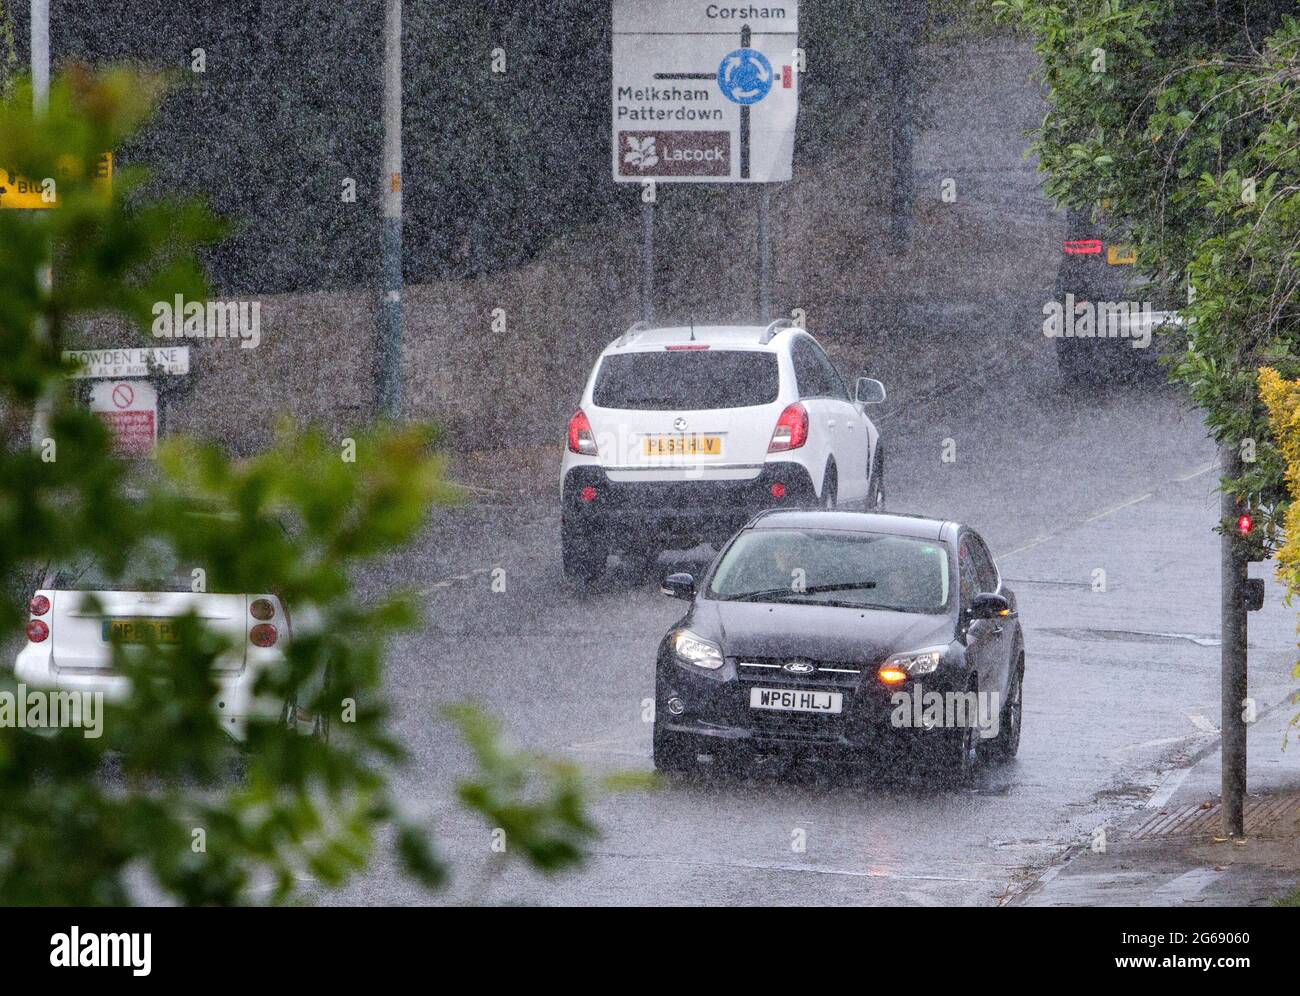 Chippenham, Wiltshire, UK. 4th July, 2021. Car drivers are pictured braving heavy rain in Chippenham as heavy rain showers make their way across Southern England. Credit: Lynchpics/Alamy Live News Stock Photo